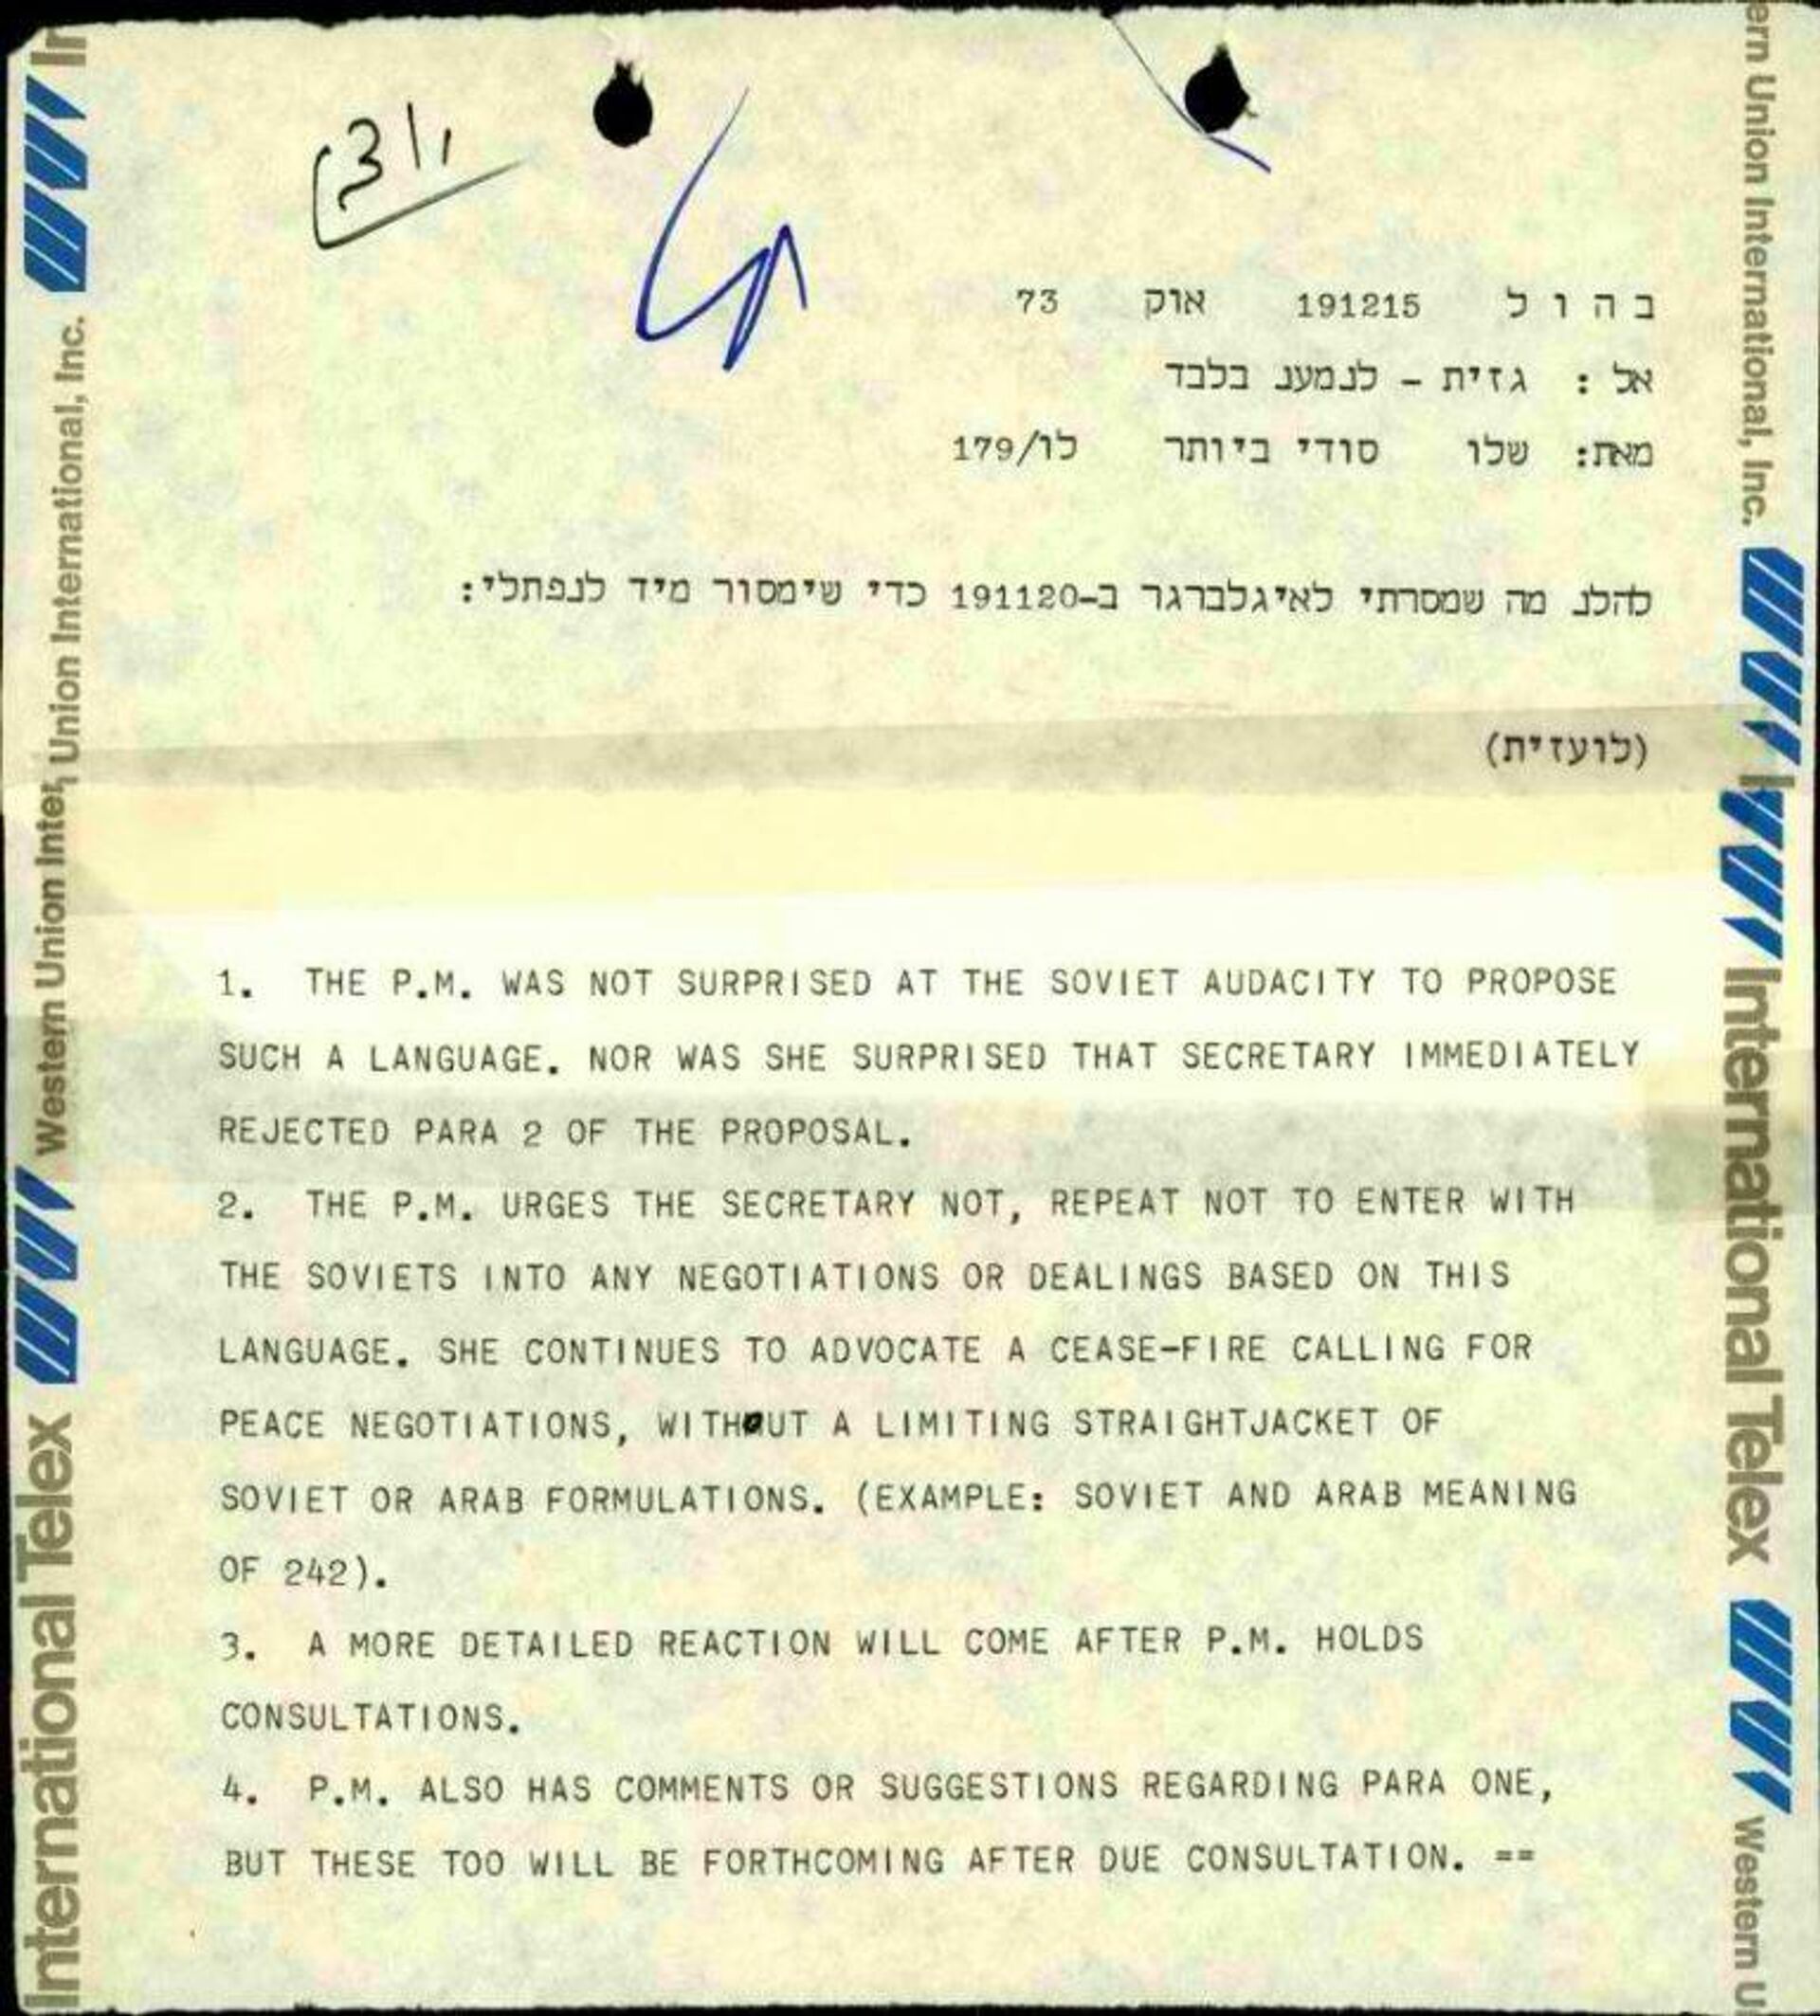 The first page of a message sent to Israeli  Foreign Minister Abba Eban by Prime Minister Golda Meir on October 18, 1973, urging that UNSC Resolution 242 be kept out of any ceasefire resolution the UNSC might issue in the coming days. - Sputnik International, 1920, 06.10.2021